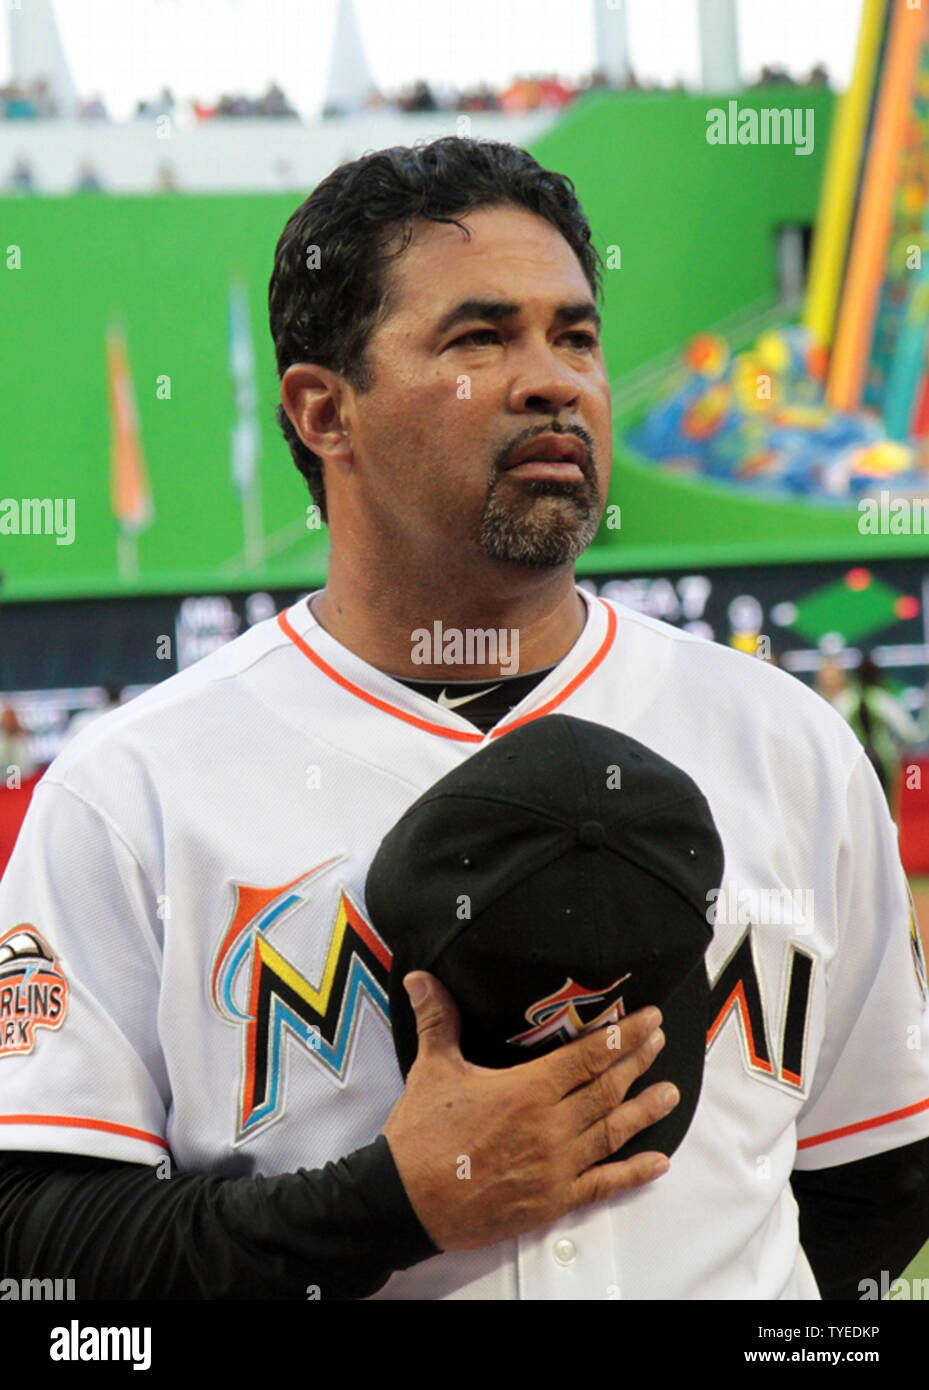 Miami Marlins manager Ozzie Guillen listens to the National Anthem at the  new Miami Marlins Ball Park on opening day April 4, 2012, in Miami, Florida.  The St. Louis Cardinals beat the